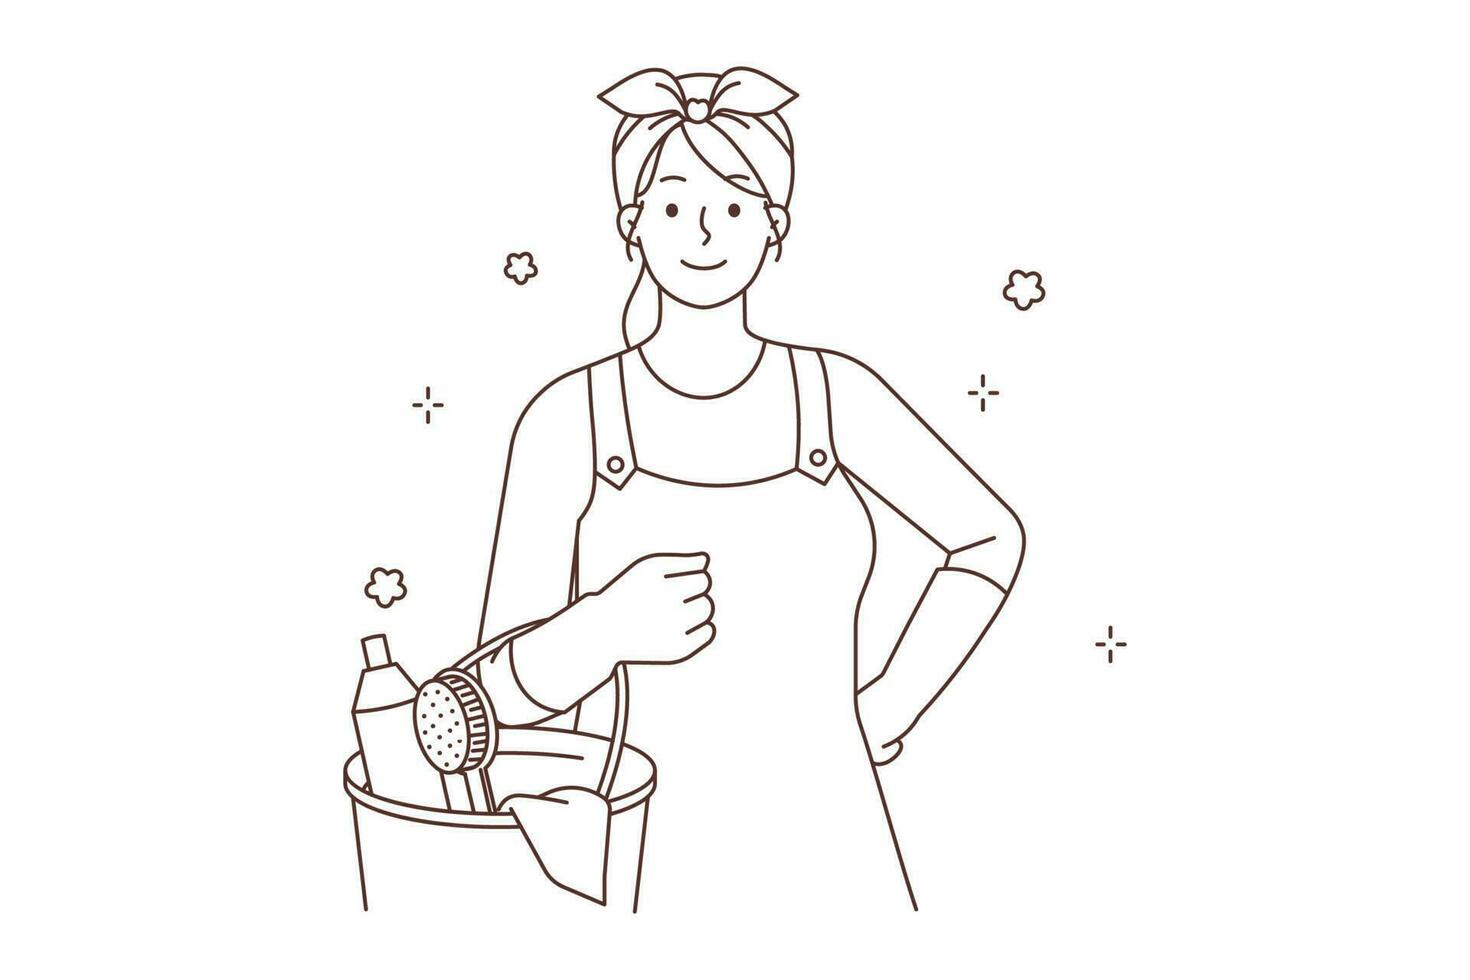 Smiling woman in uniform work in housekeeping service. Happy female housekeeper with clean bottles. Sanitor occupation. Vector illustration.